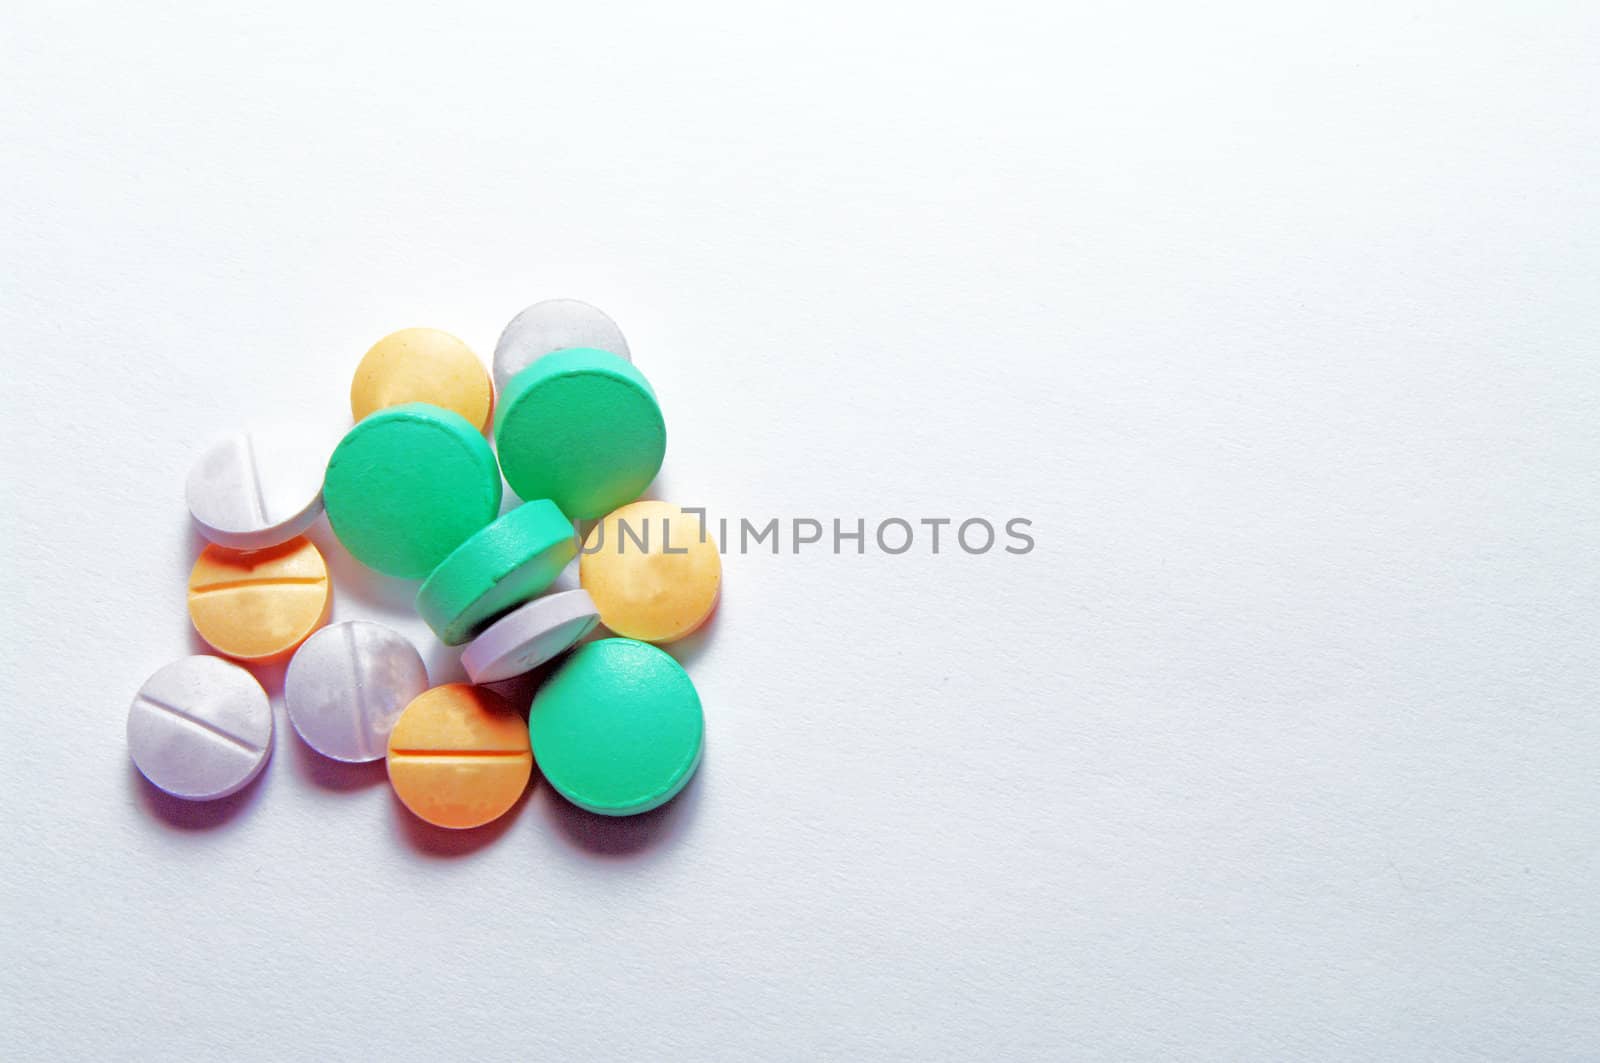 Pills on a white background by edcorey